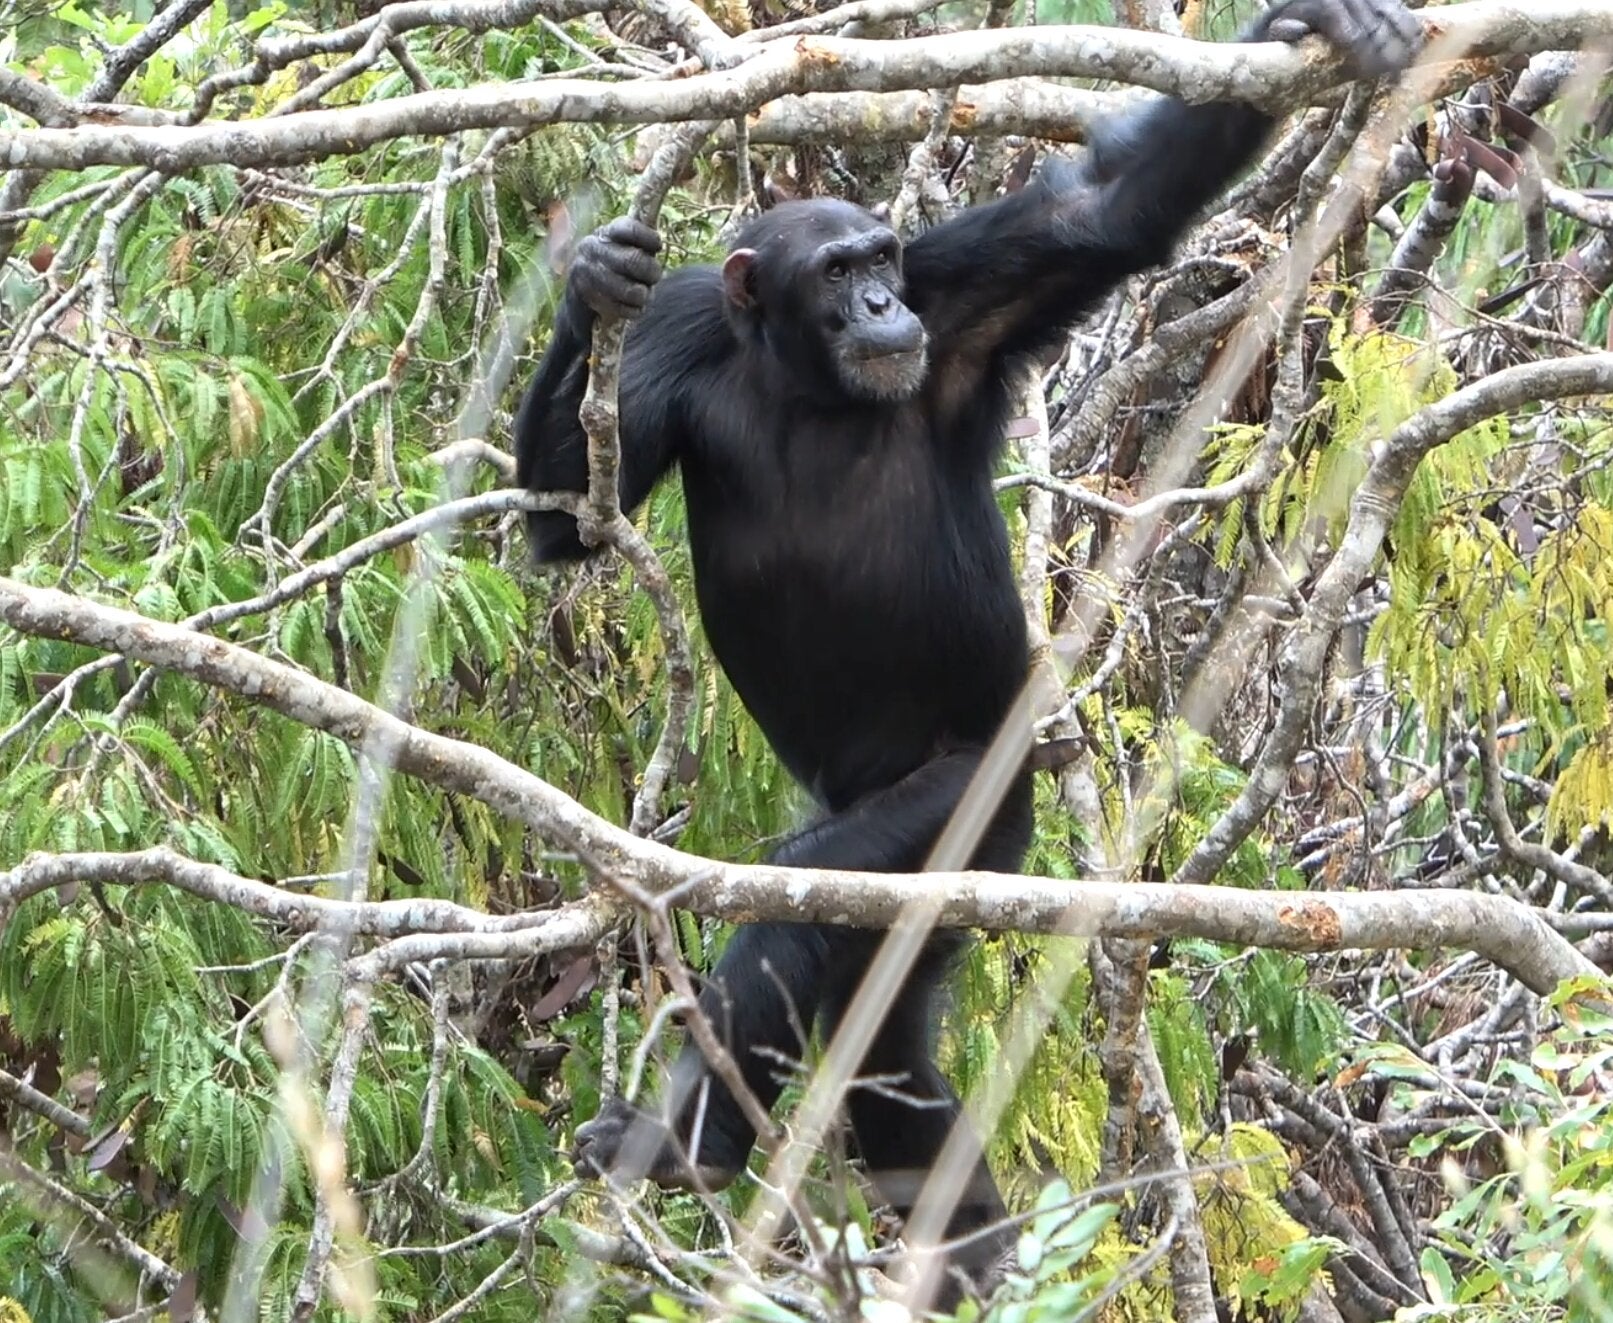 An adult male chimpanzee walks upright in the open canopy, characteristic of the Issa Valley habitat